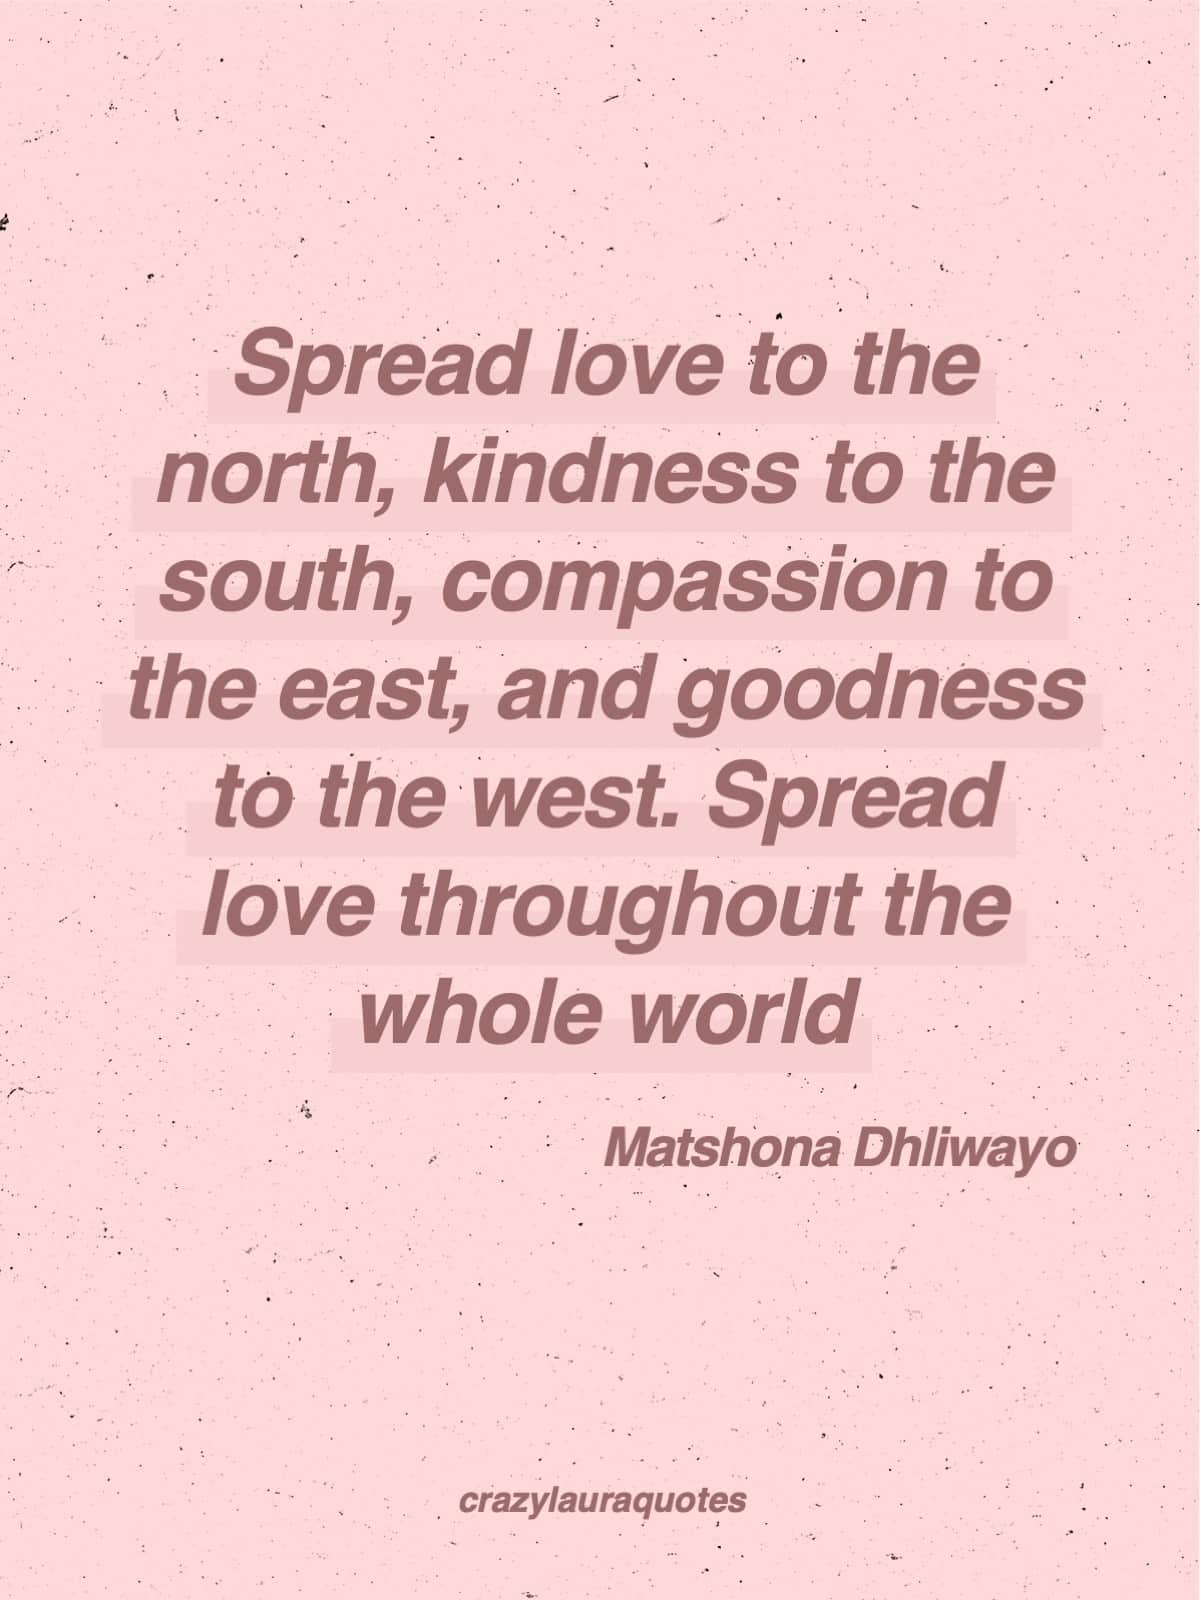 spread love and kindness in the world statement